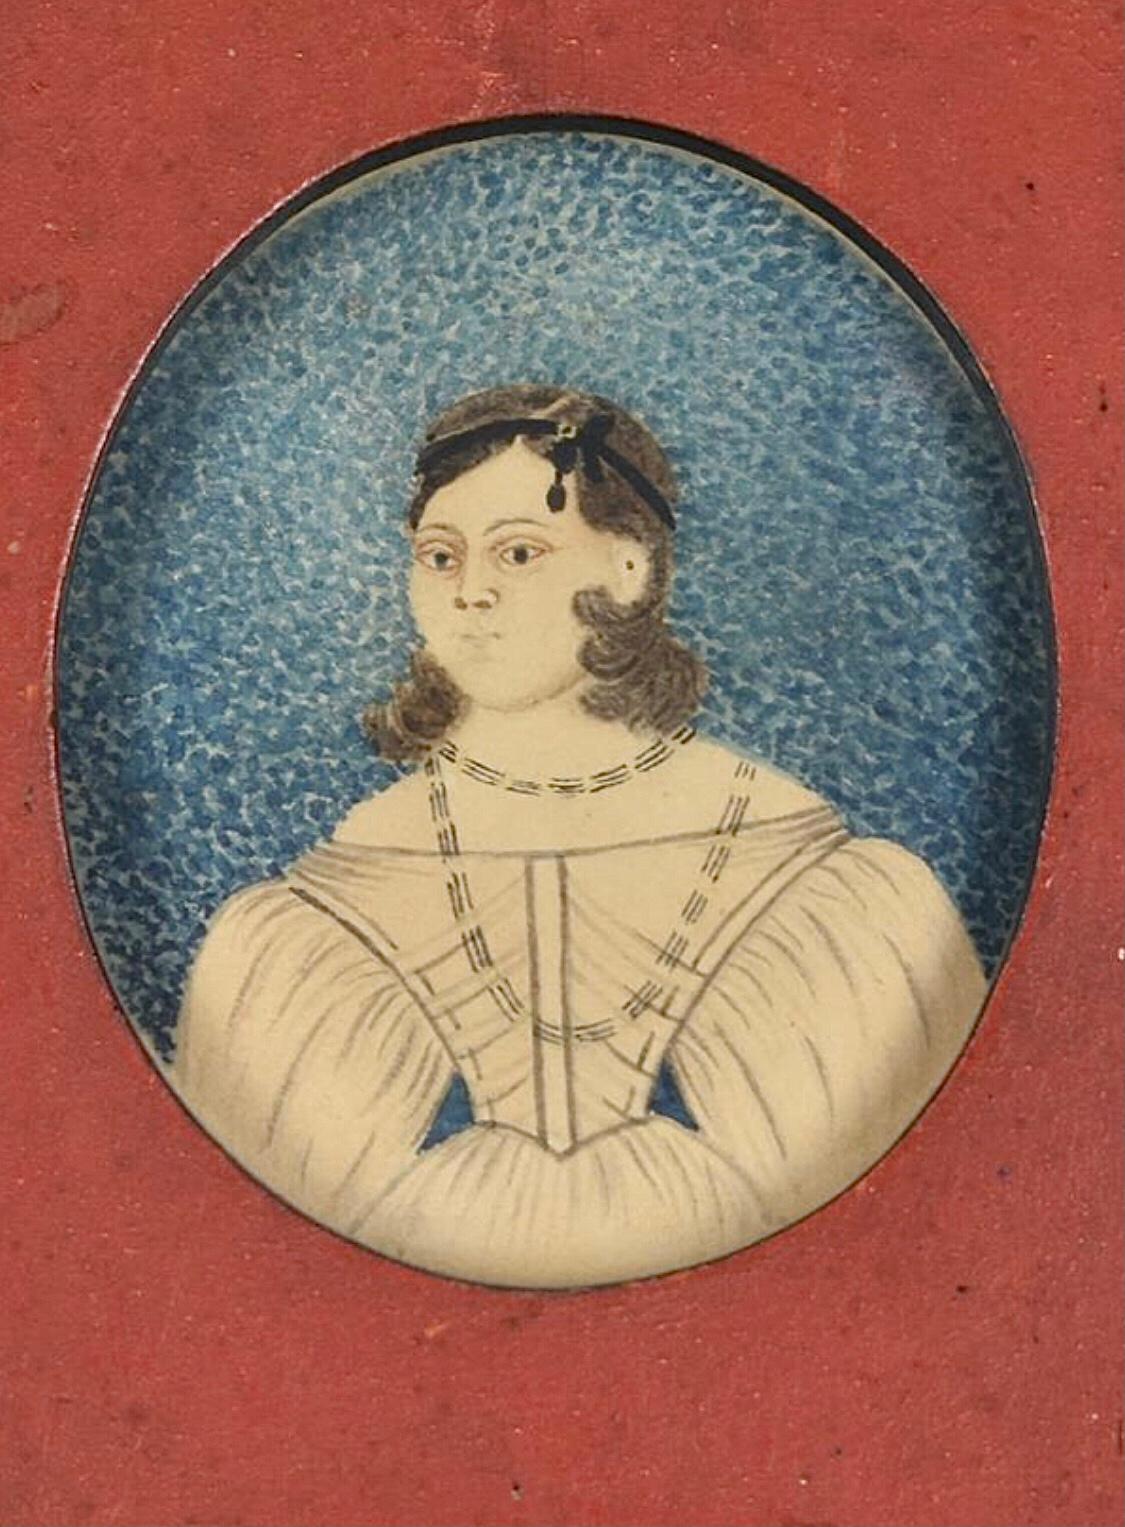 North American Early 19th Century American Folk Art Painting of a Young Lady